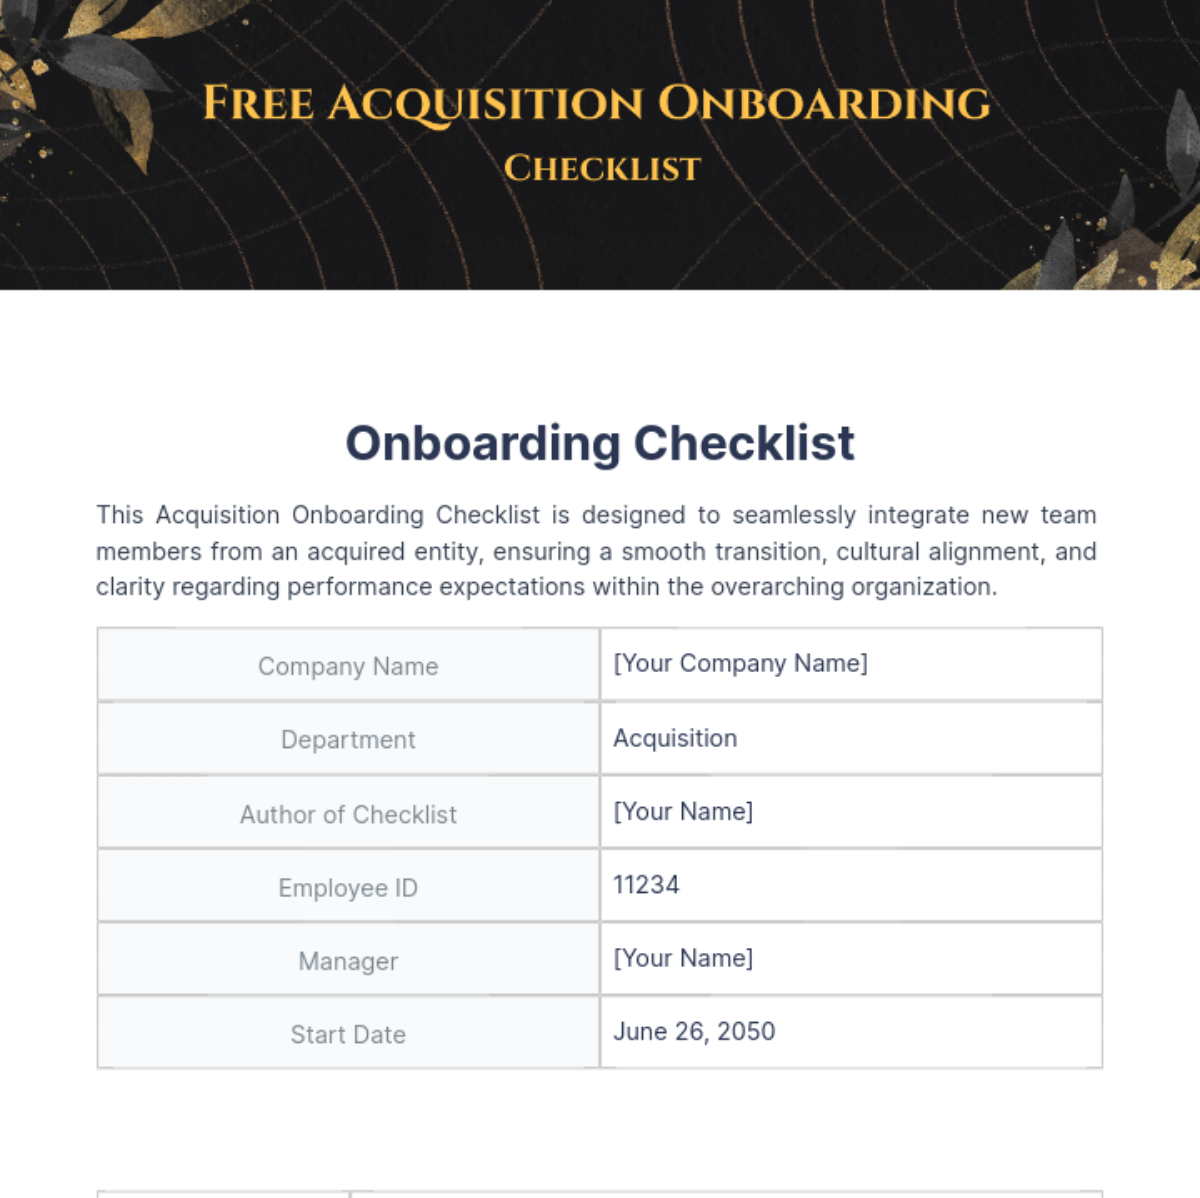 Free Acquisition Onboarding Checklist Template